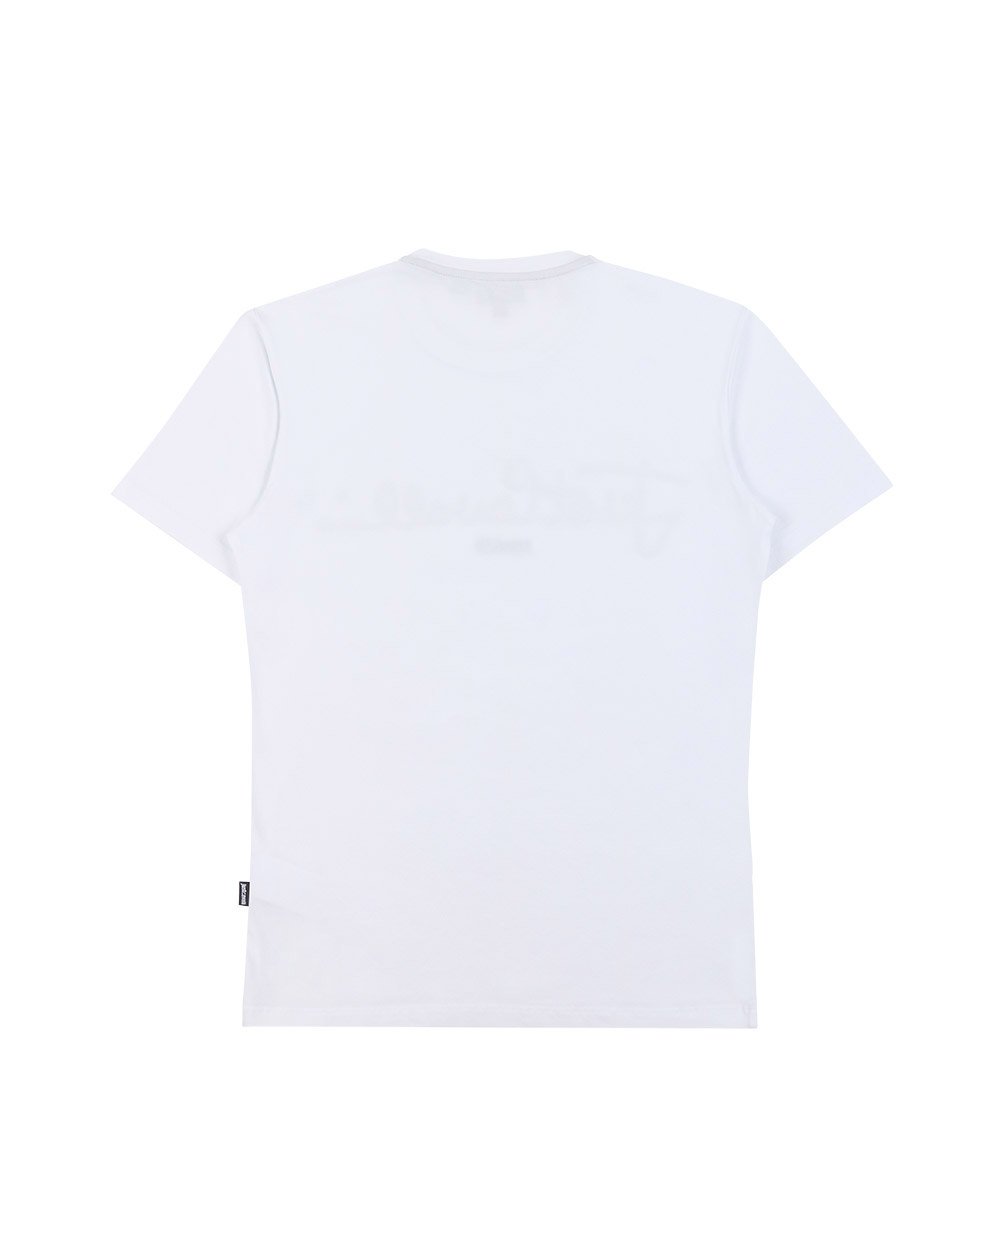 Printed Crew Neck Short Sleeves T-Shirt - ISSI Outlet